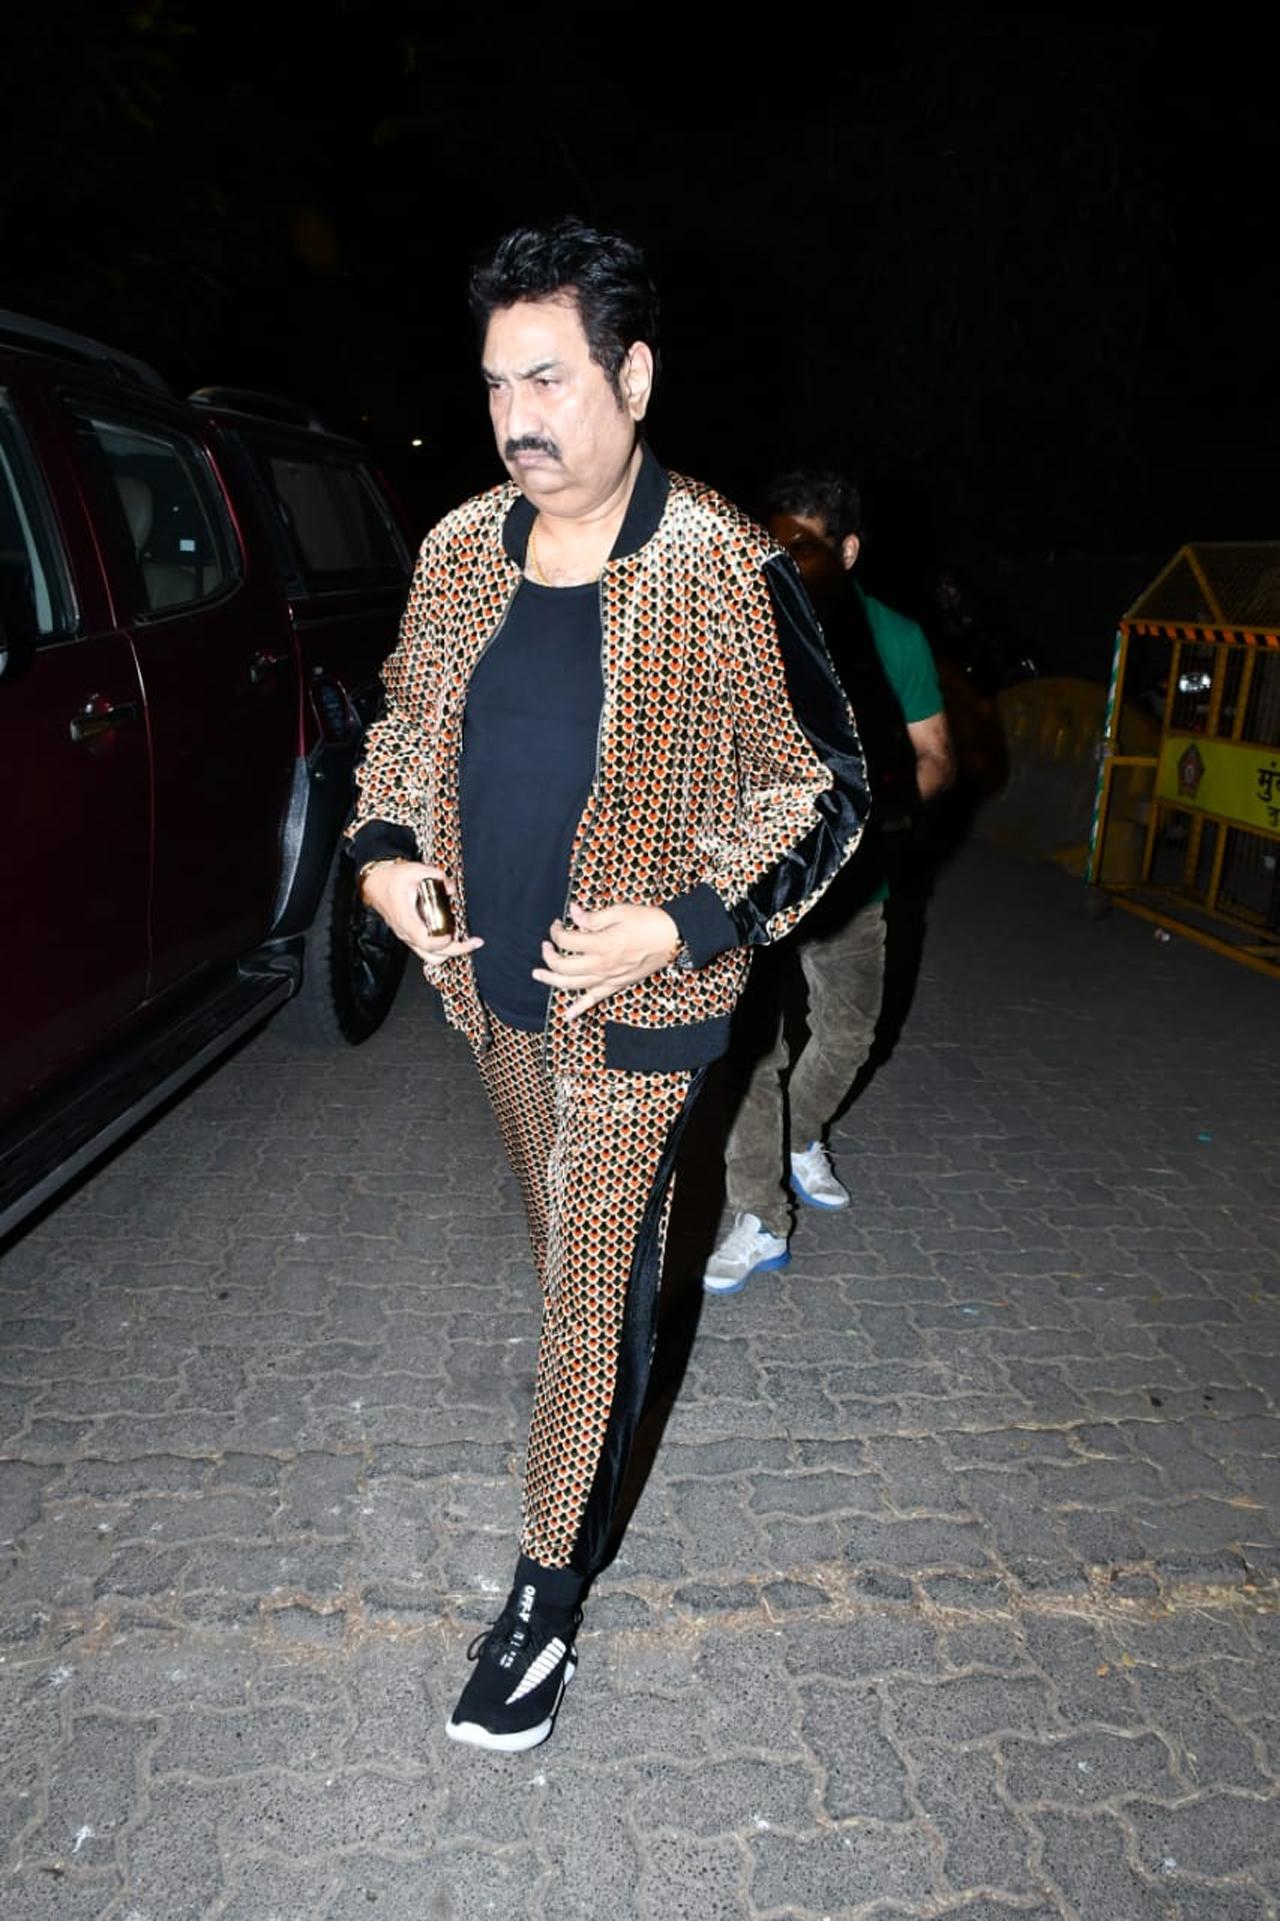 '90s superstar singer Kumar Sanu arrived with his wife to pay their final respects to Bappi Lahiri.